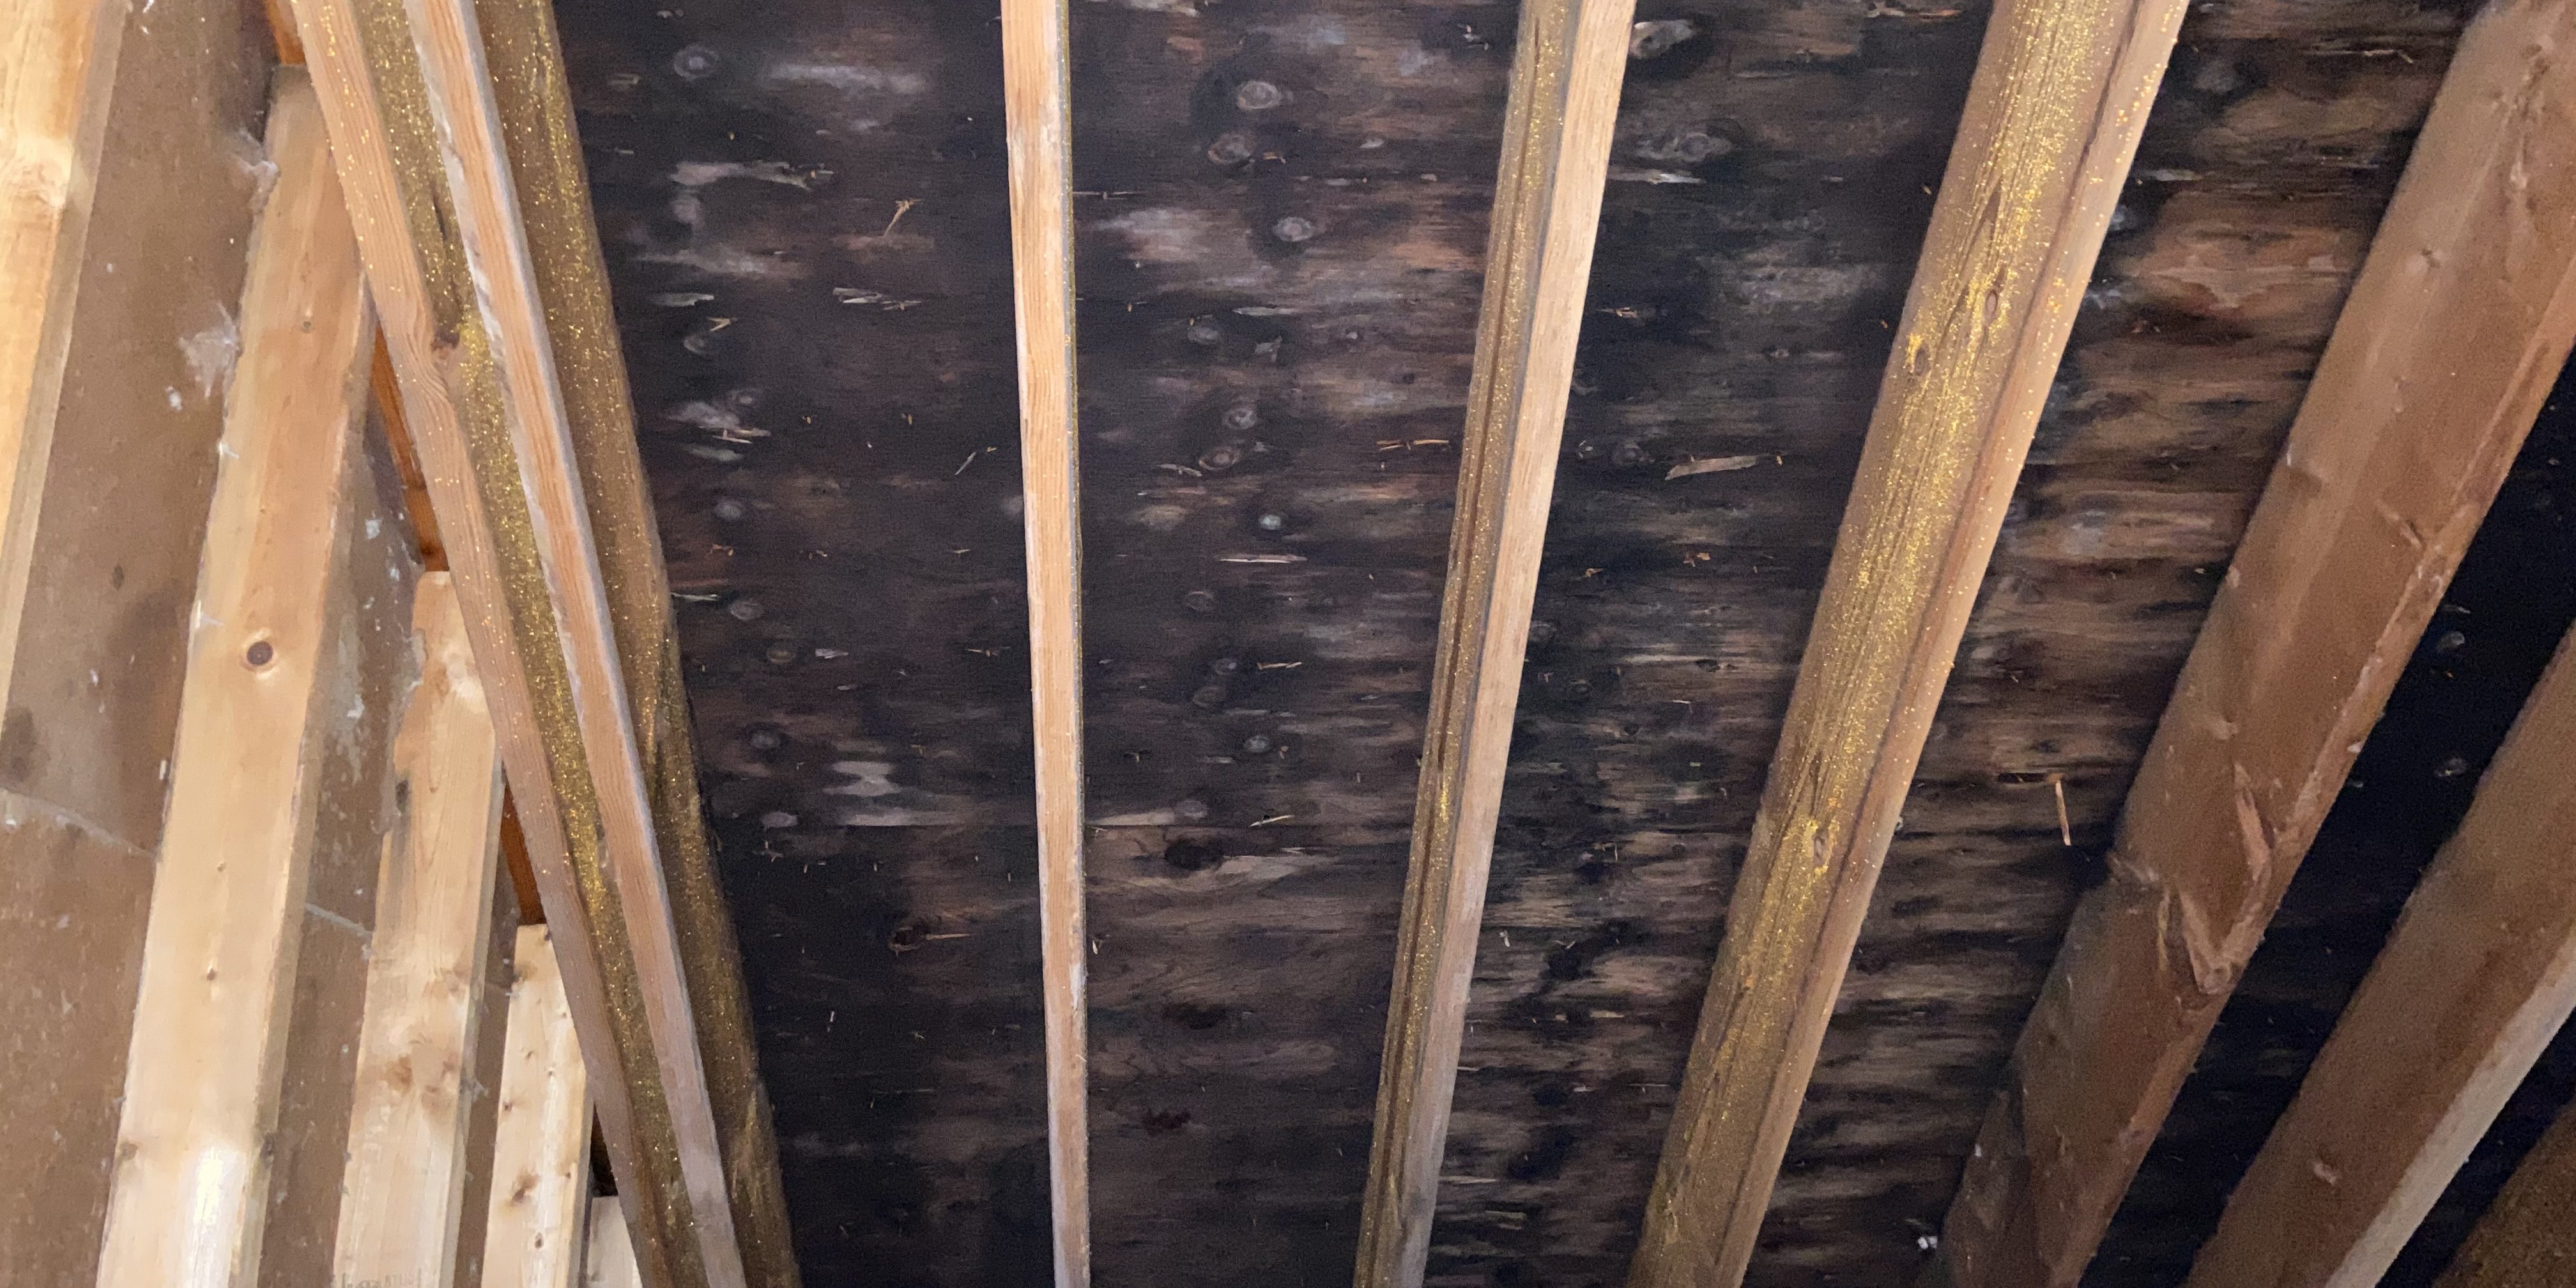 Black Mold In Attic Pictures Image Balcony and Attic